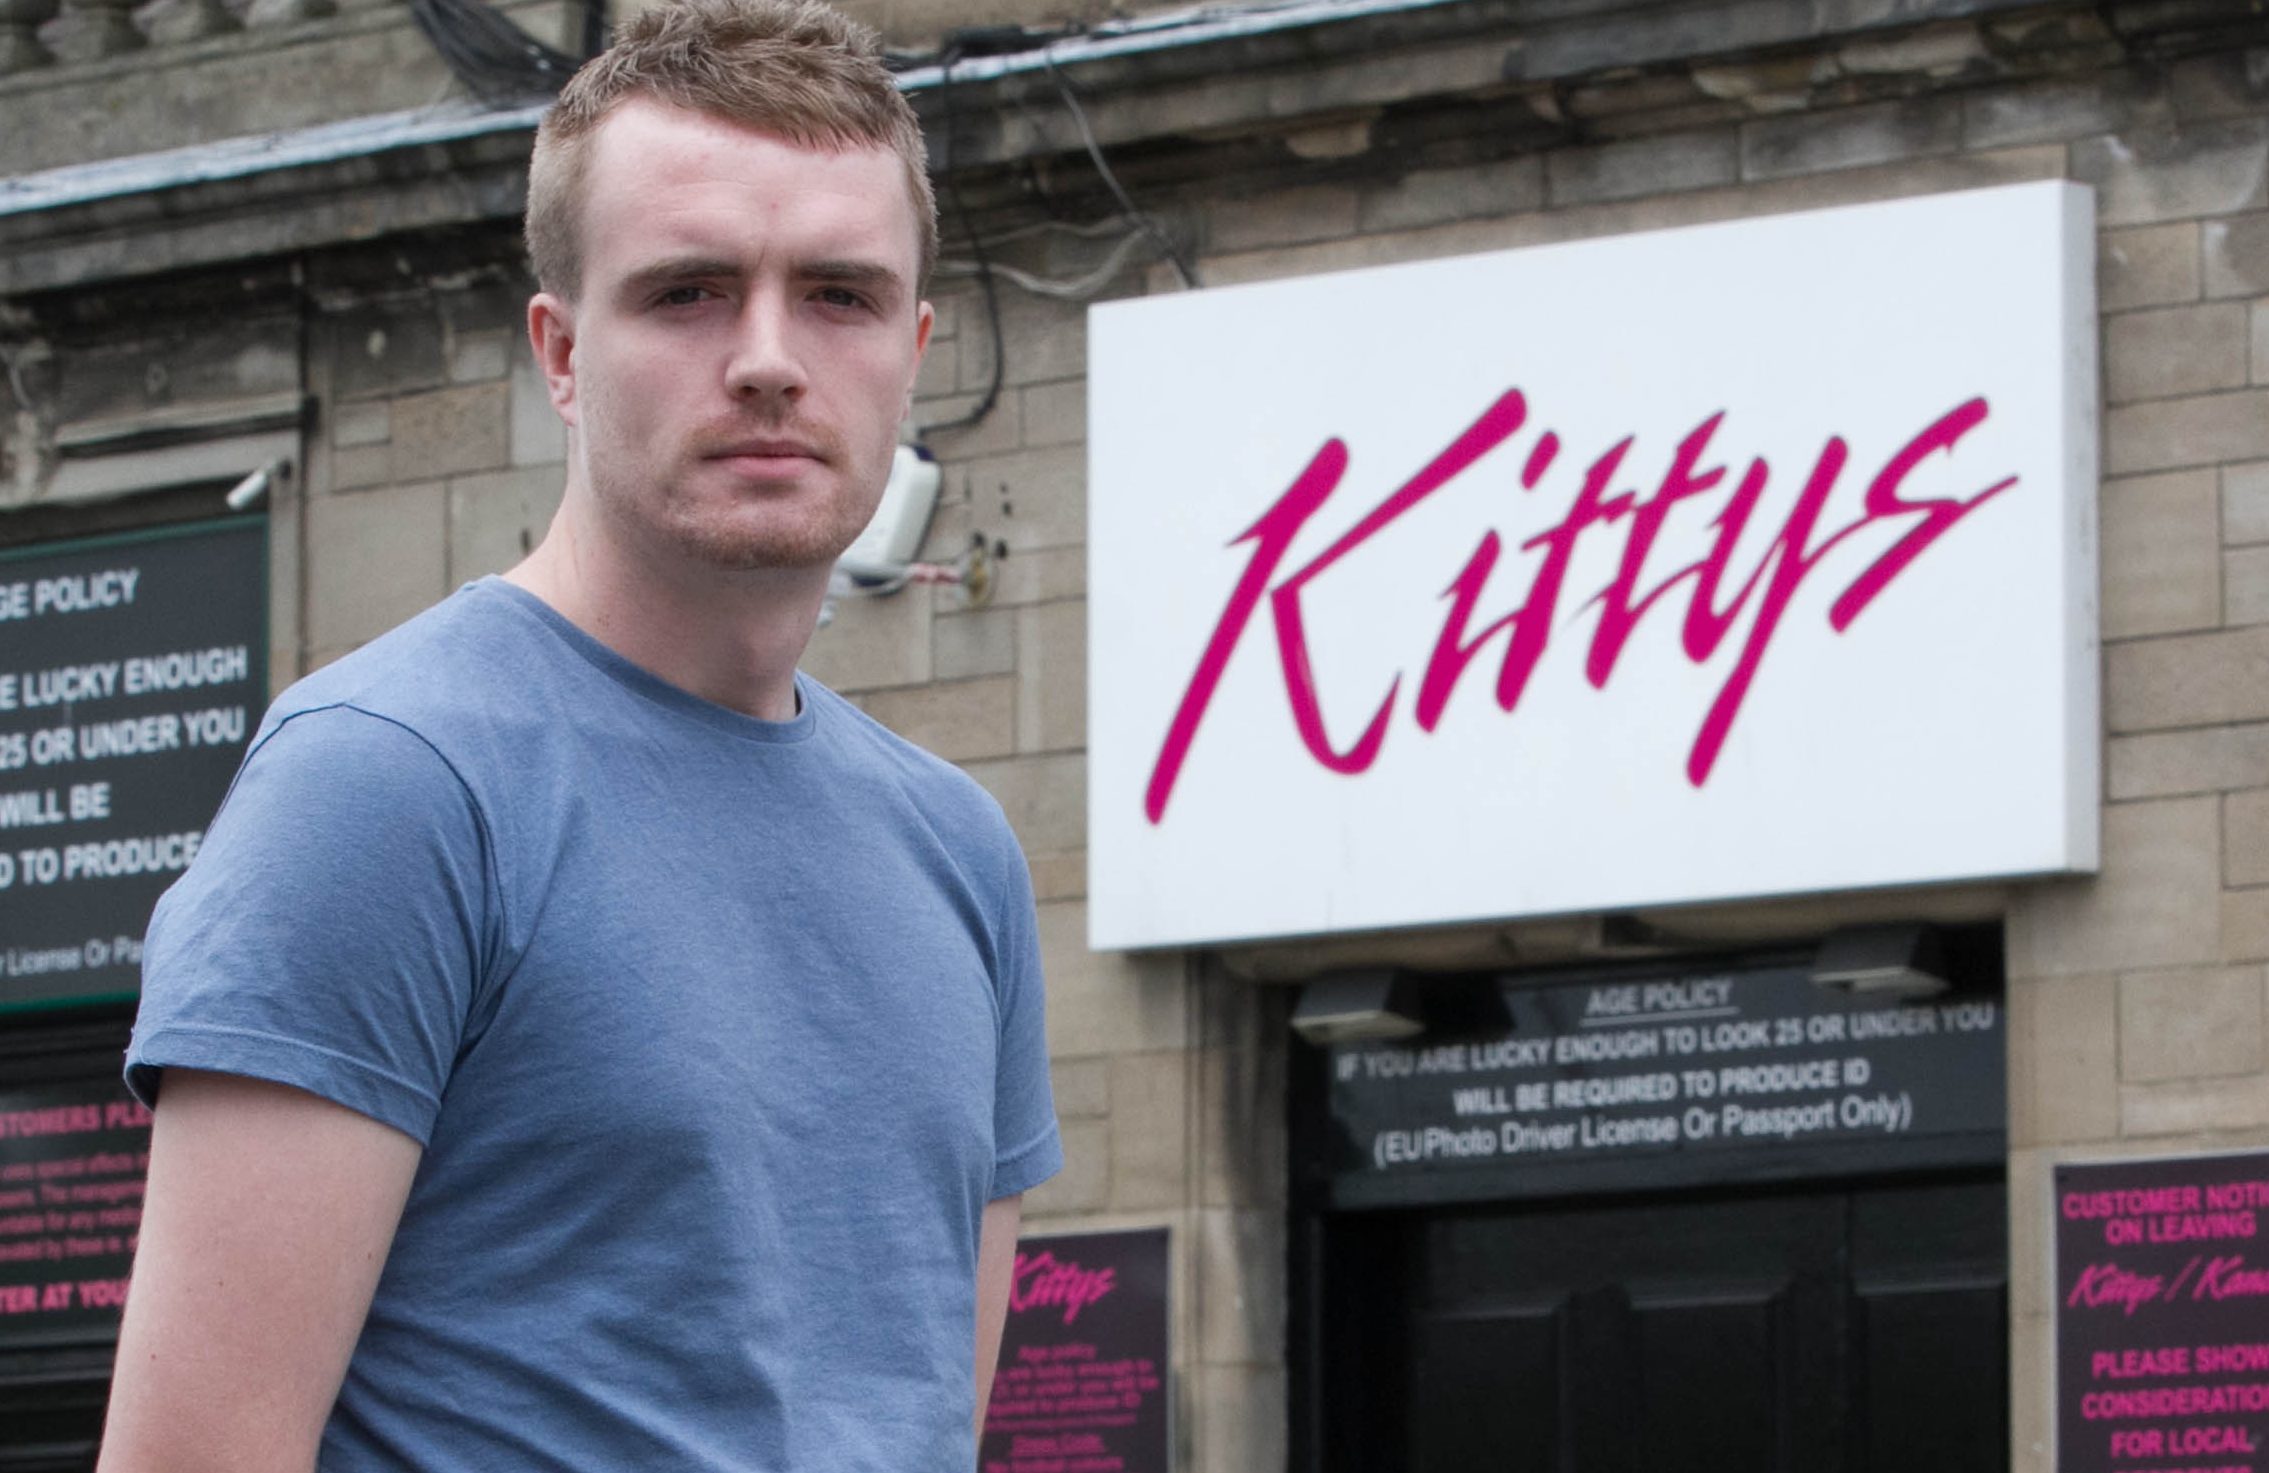 Robbie Stirling was attacked outside Kittys nightclub 4 years ago (C Austin/ DcThomson)